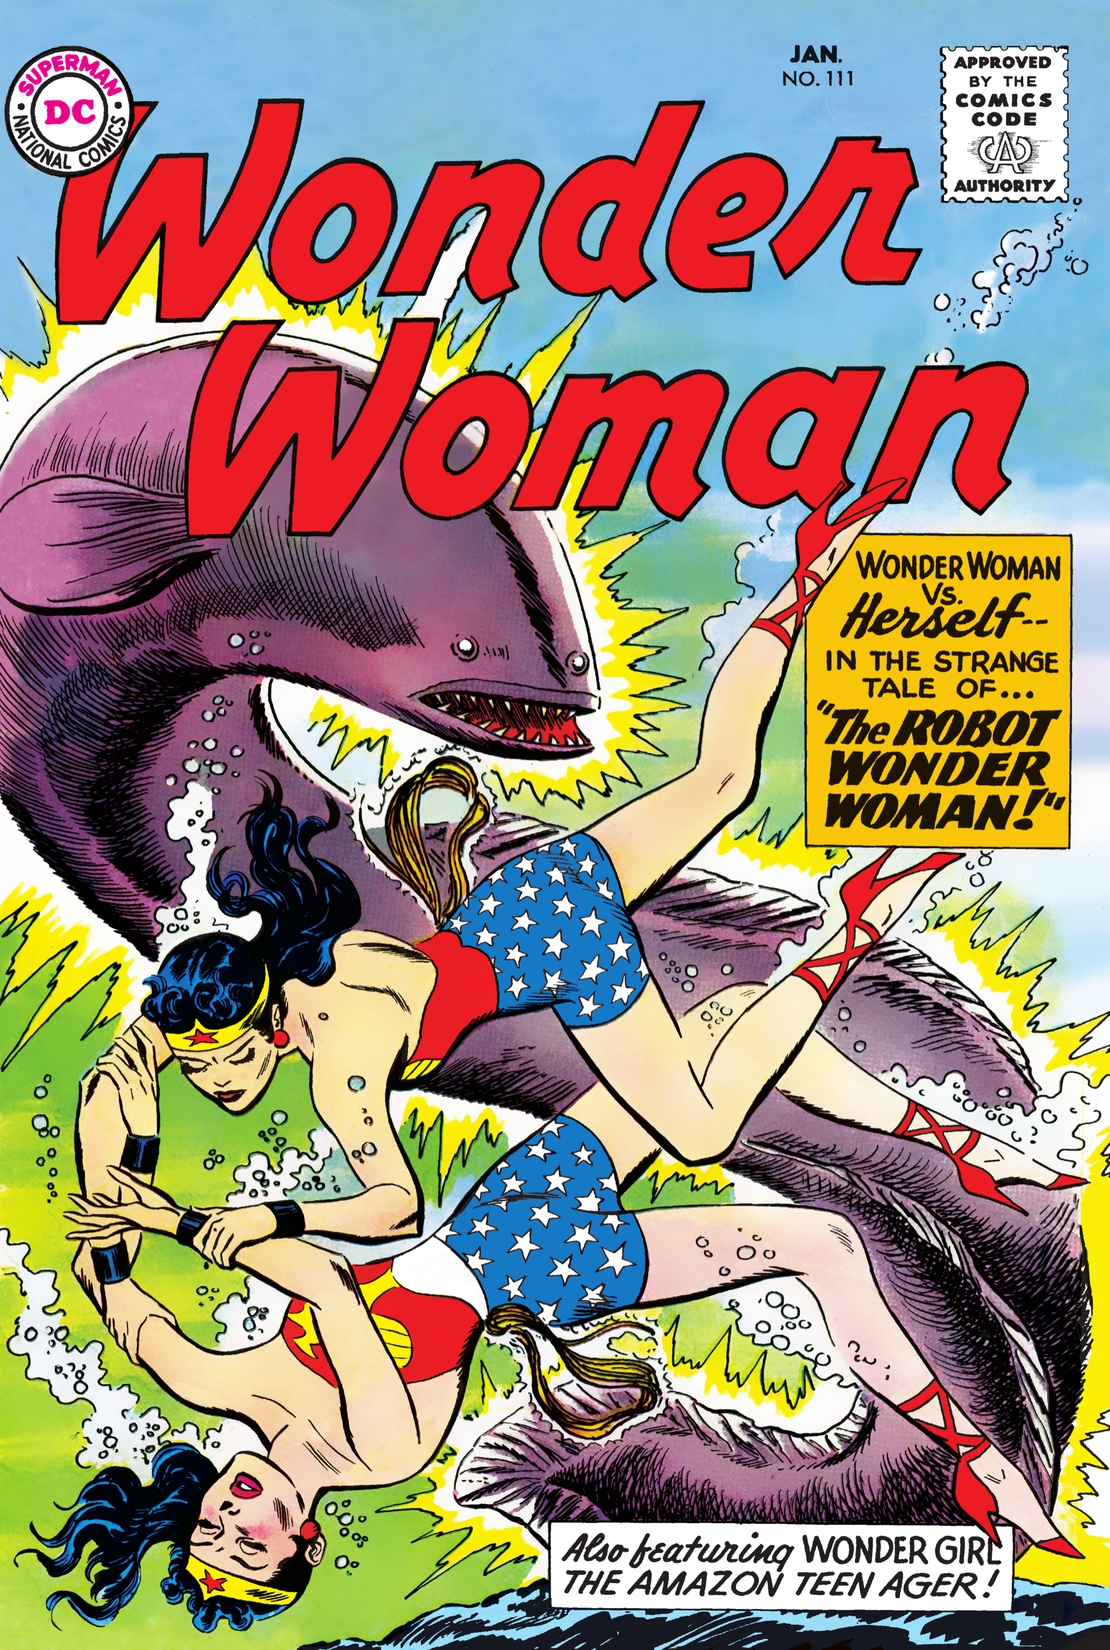 Wonder Woman (1942-1986) #111 preview images